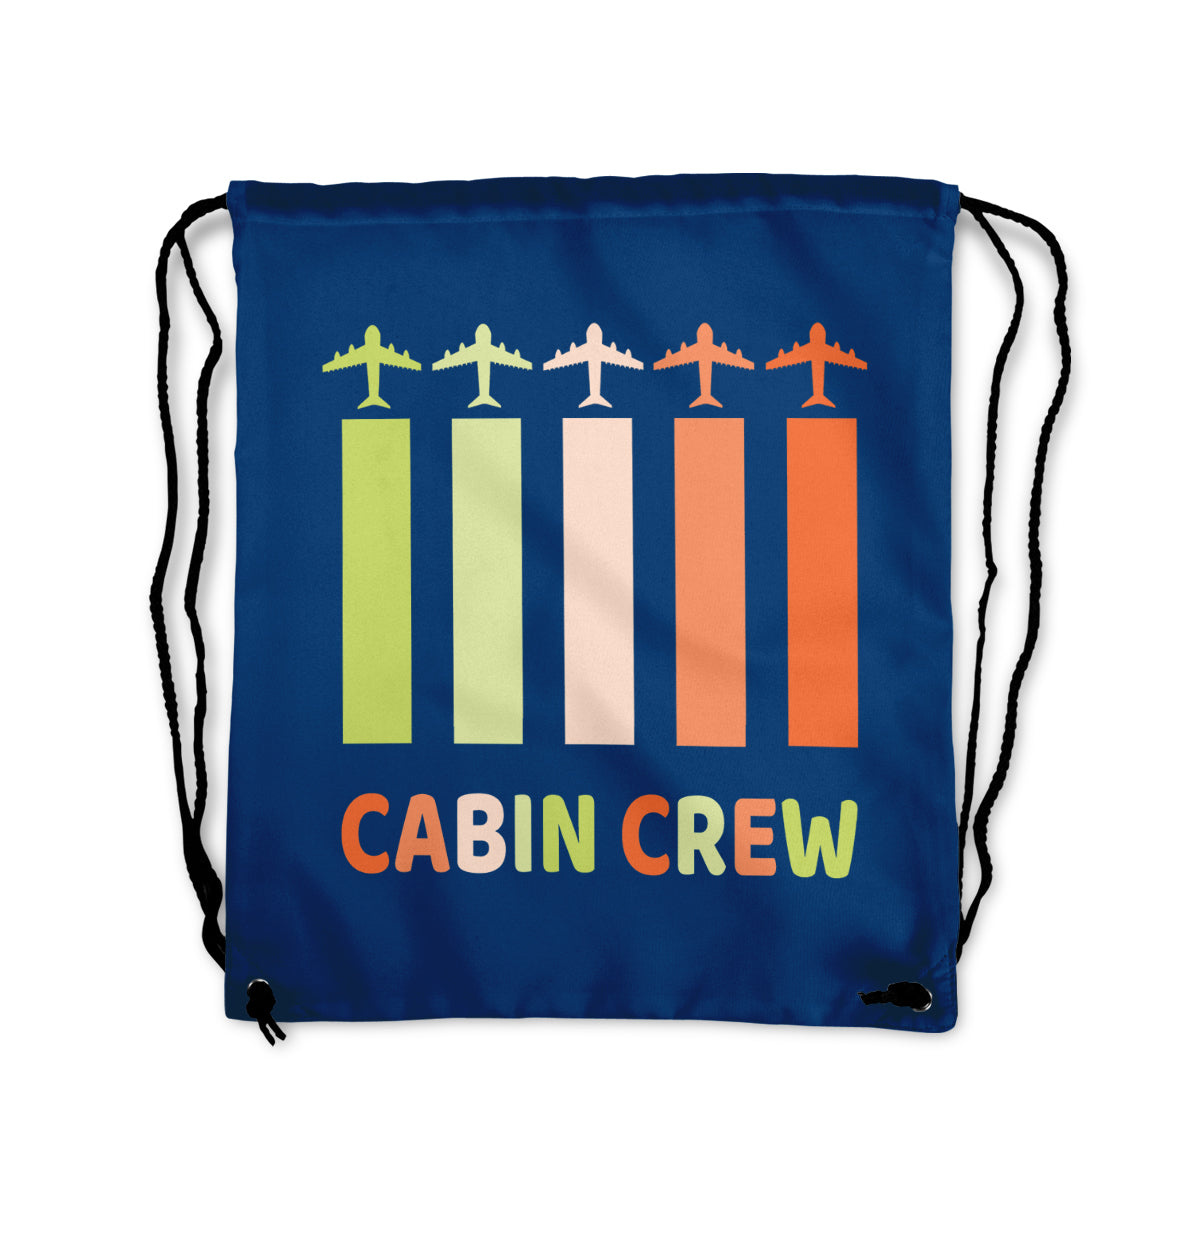 Colourful Cabin Crew Designed Drawstring Bags